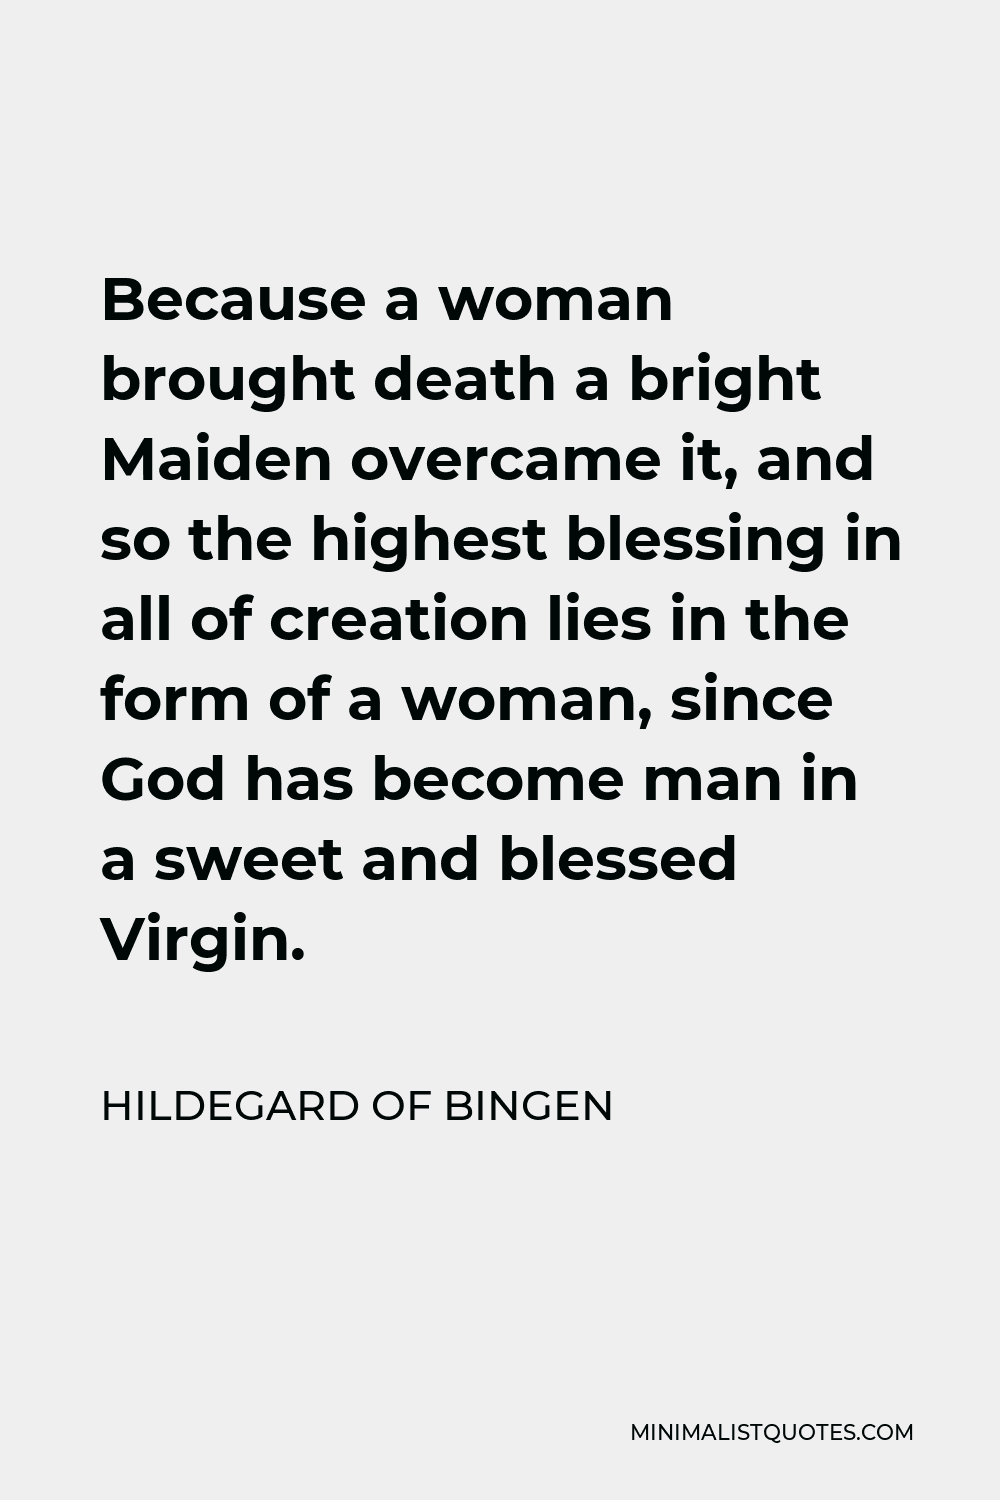 Hildegard of Bingen Quote - Because a woman brought death a bright Maiden overcame it, and so the highest blessing in all of creation lies in the form of a woman, since God has become man in a sweet and blessed Virgin.